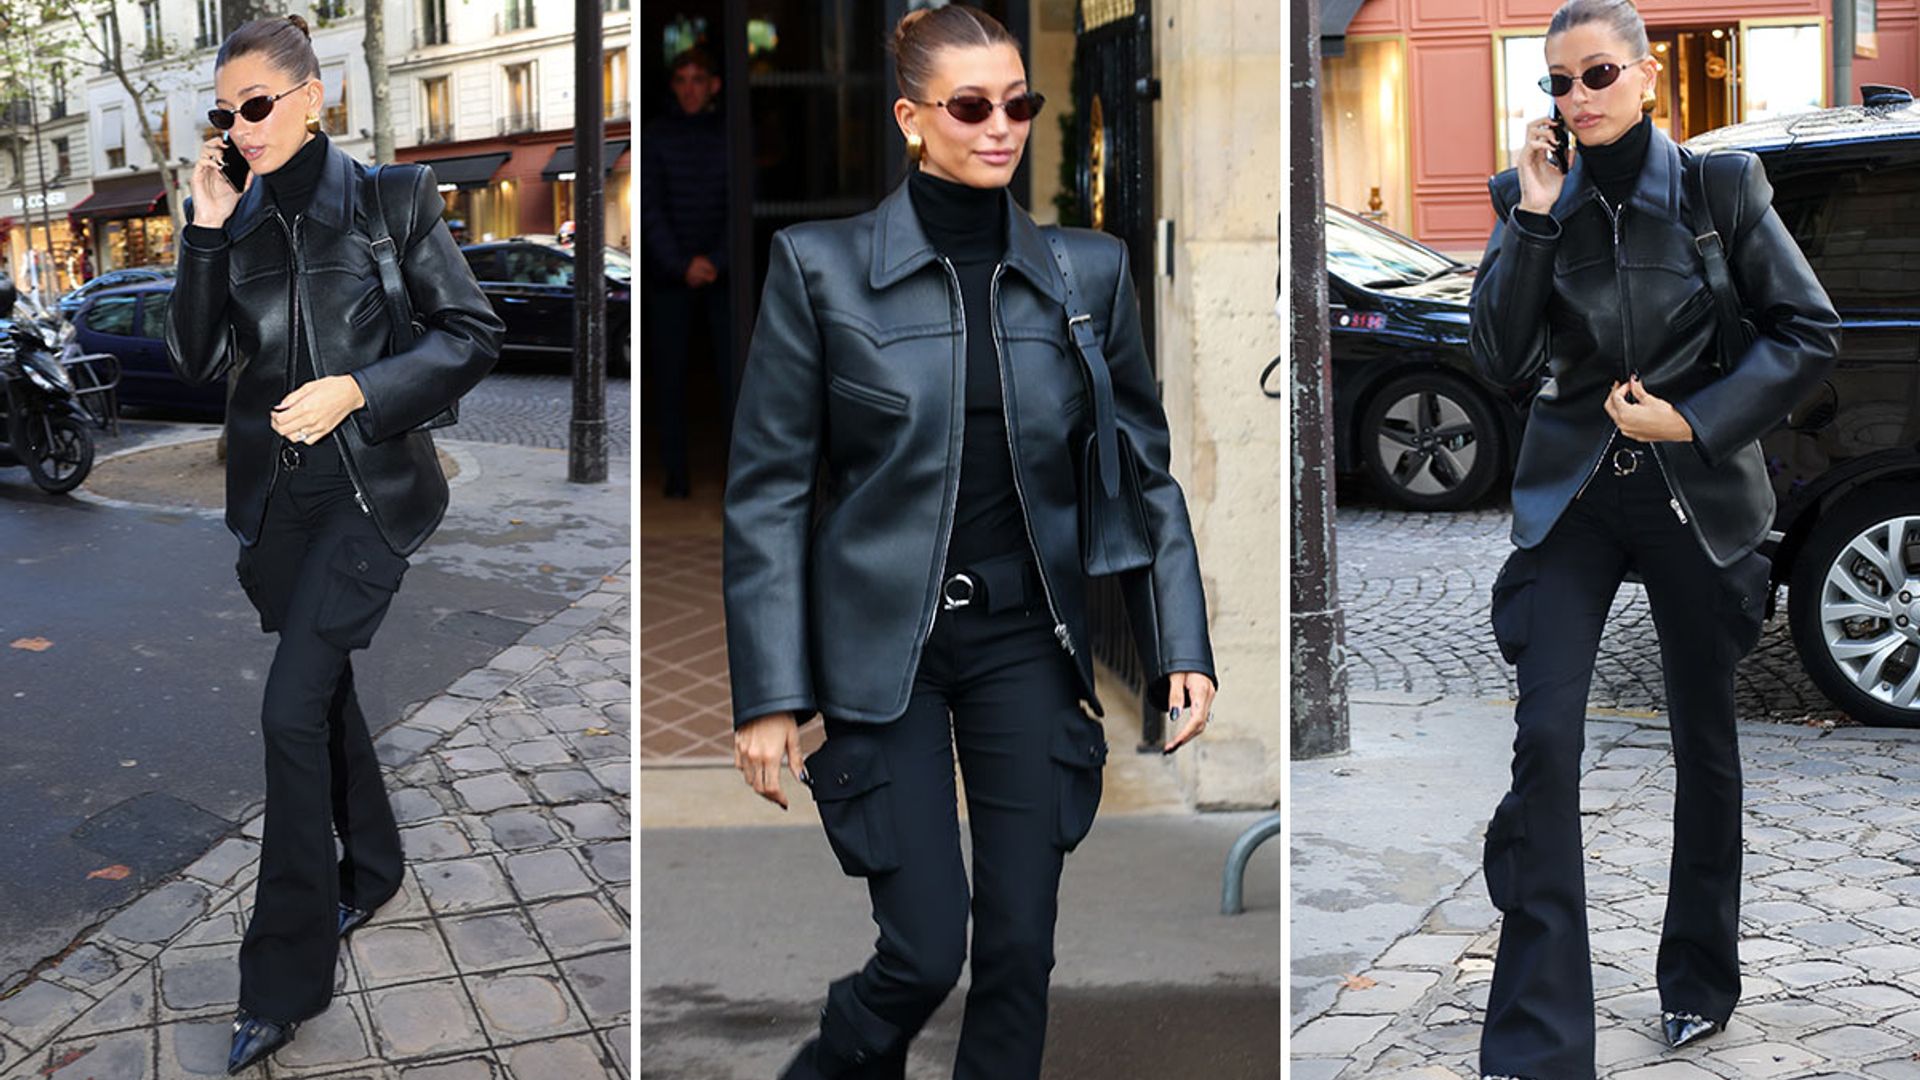 Hailey Bieber is putting on a fashion show on the streets of Paris